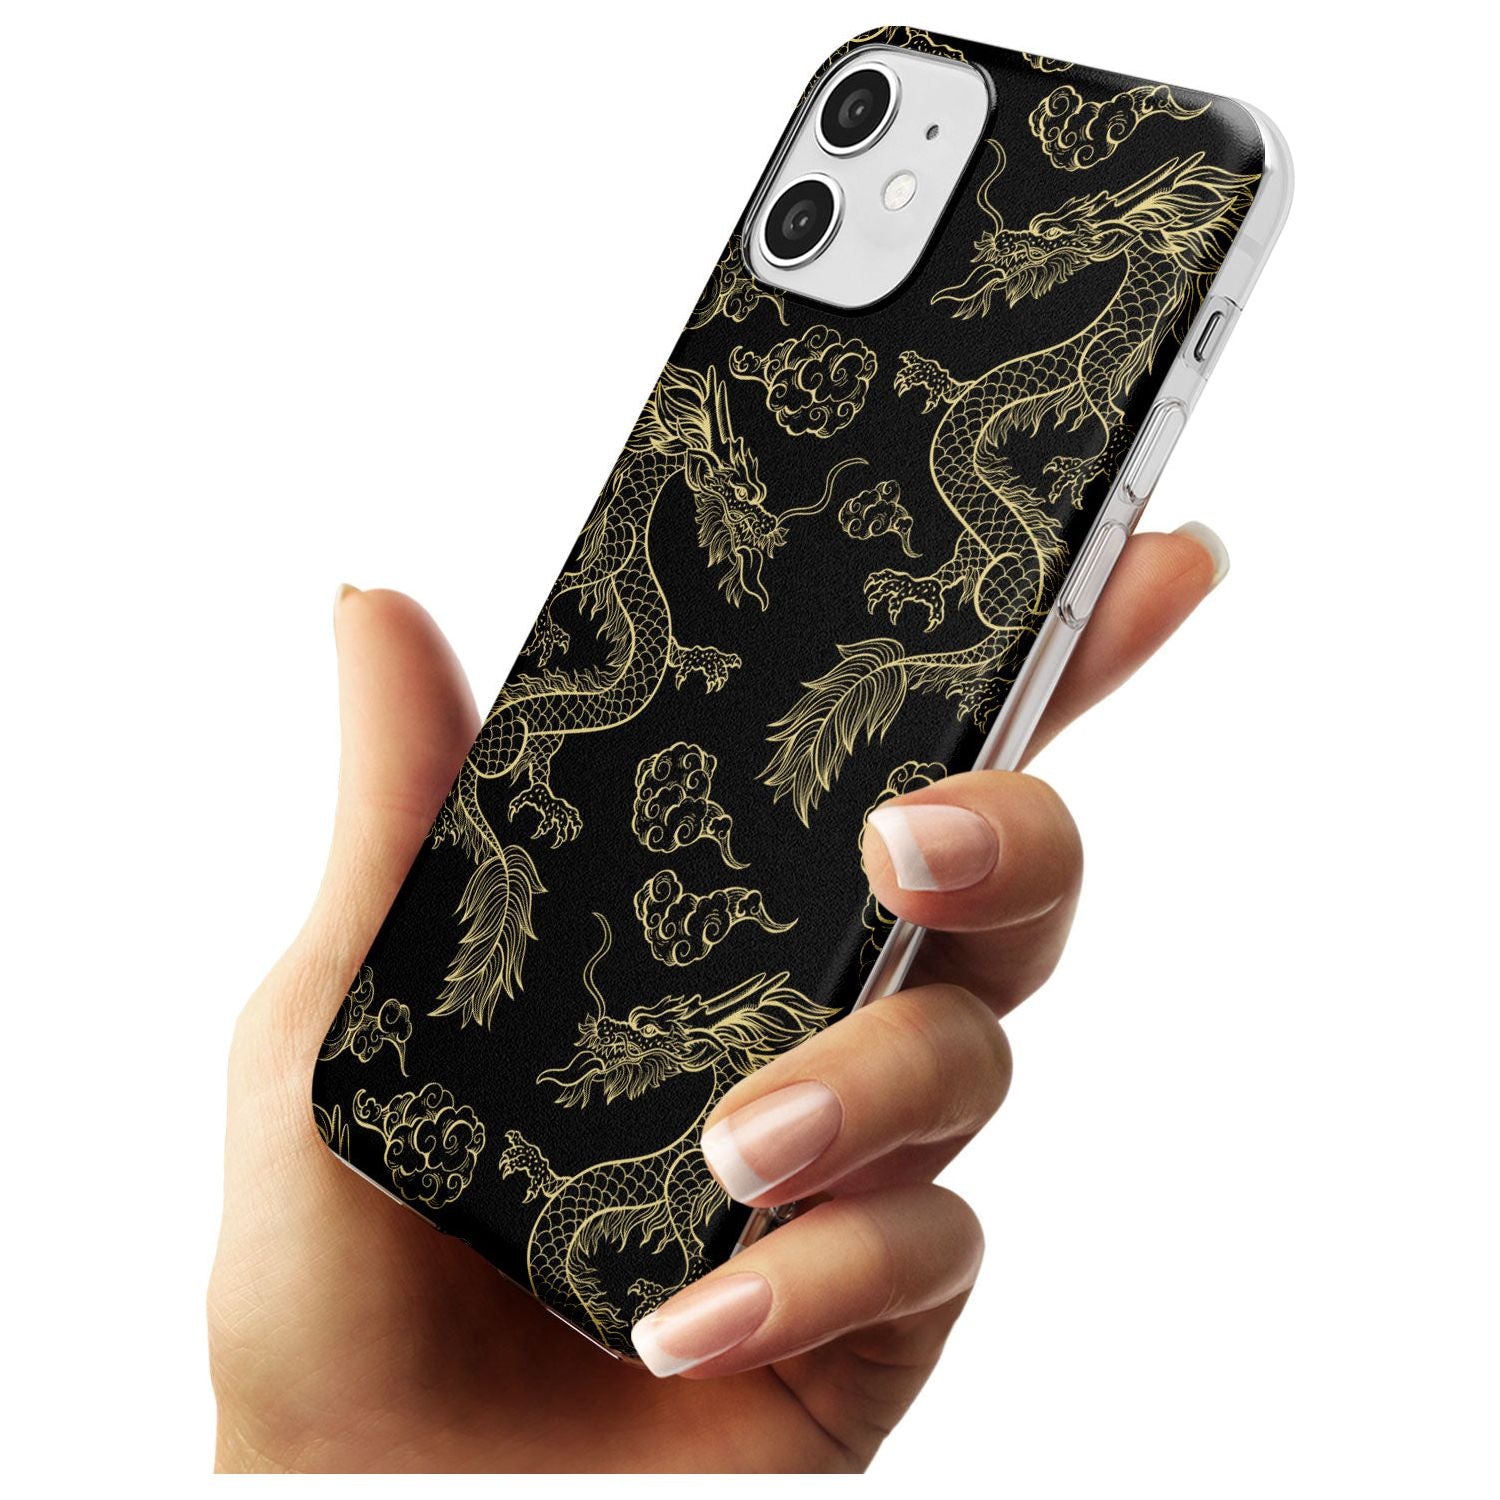 Black and Gold Dragon Pattern Slim TPU Phone Case for iPhone 11